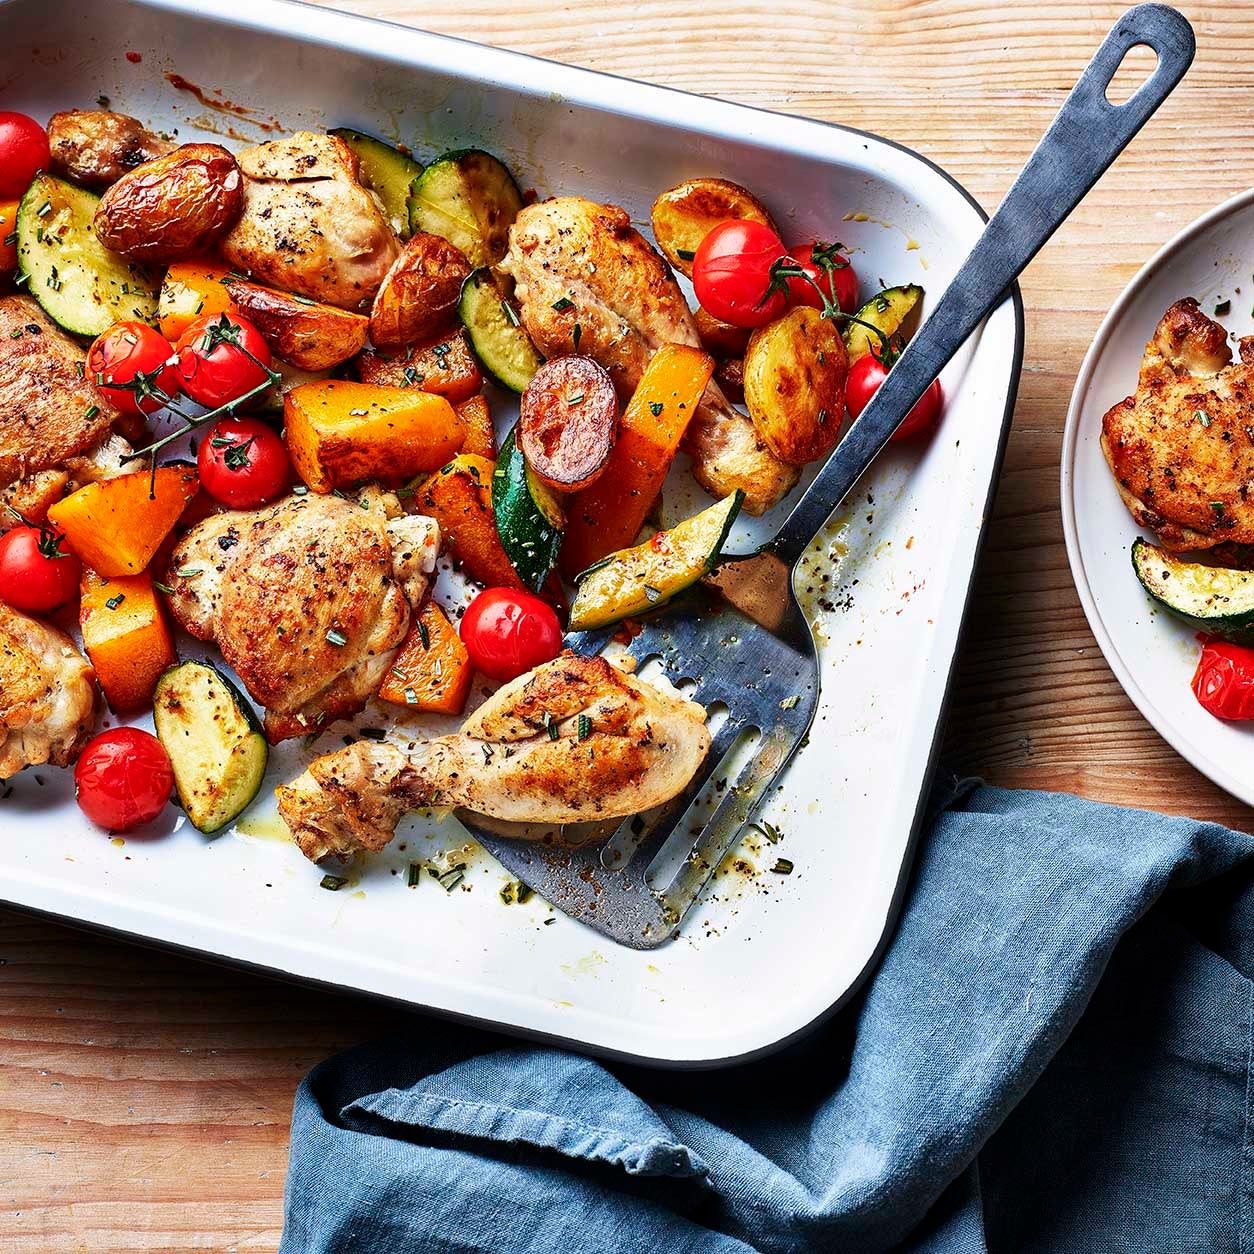 Photo of Roast chicken & vegetables by WW